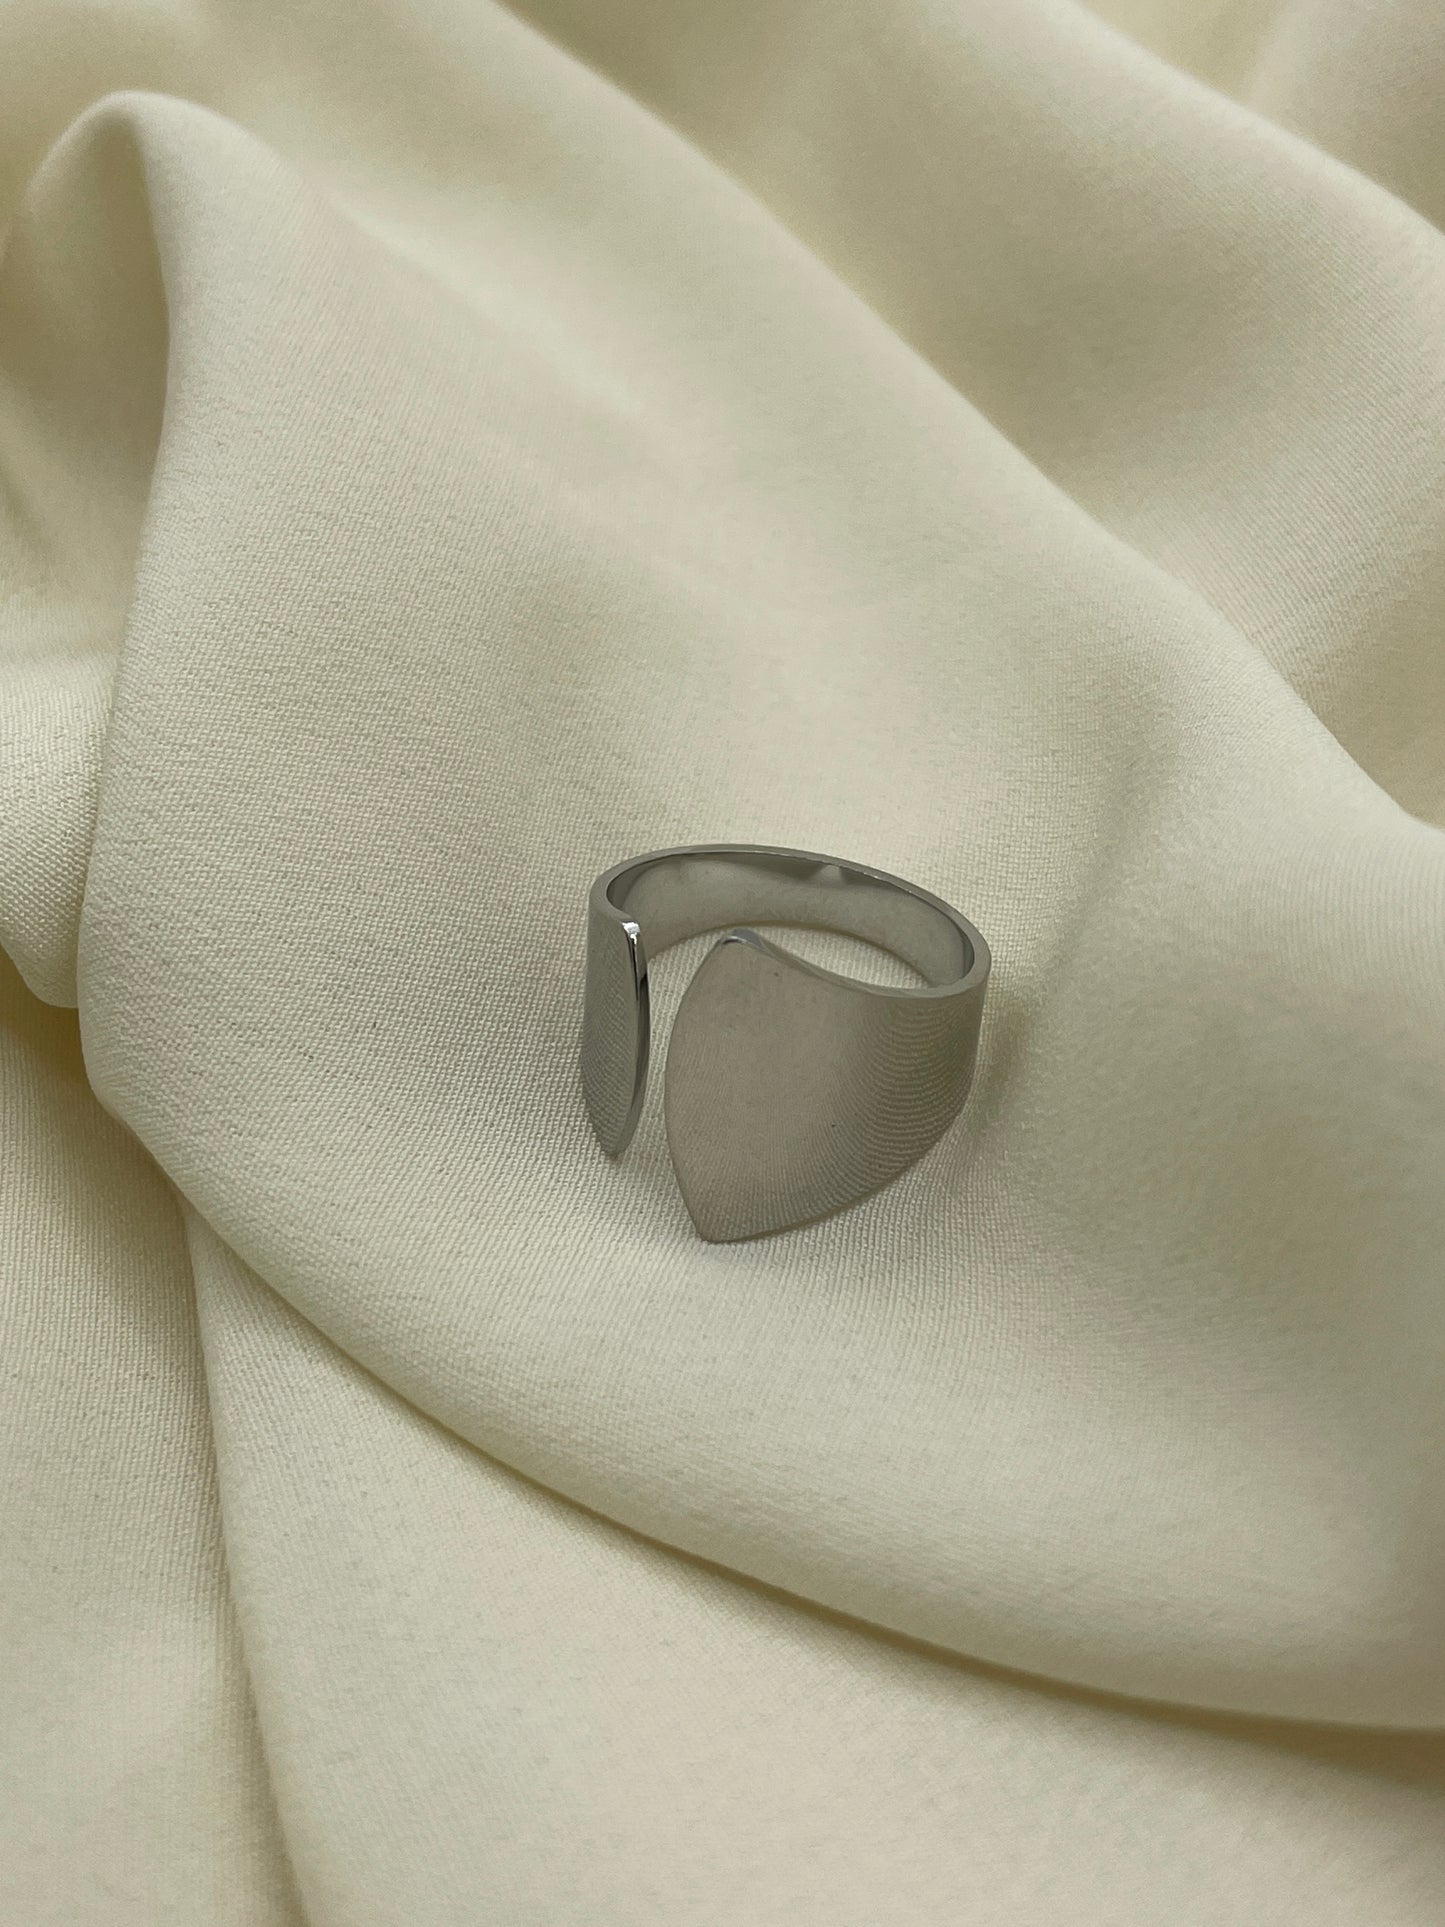 Large Flat Open Ring Silver